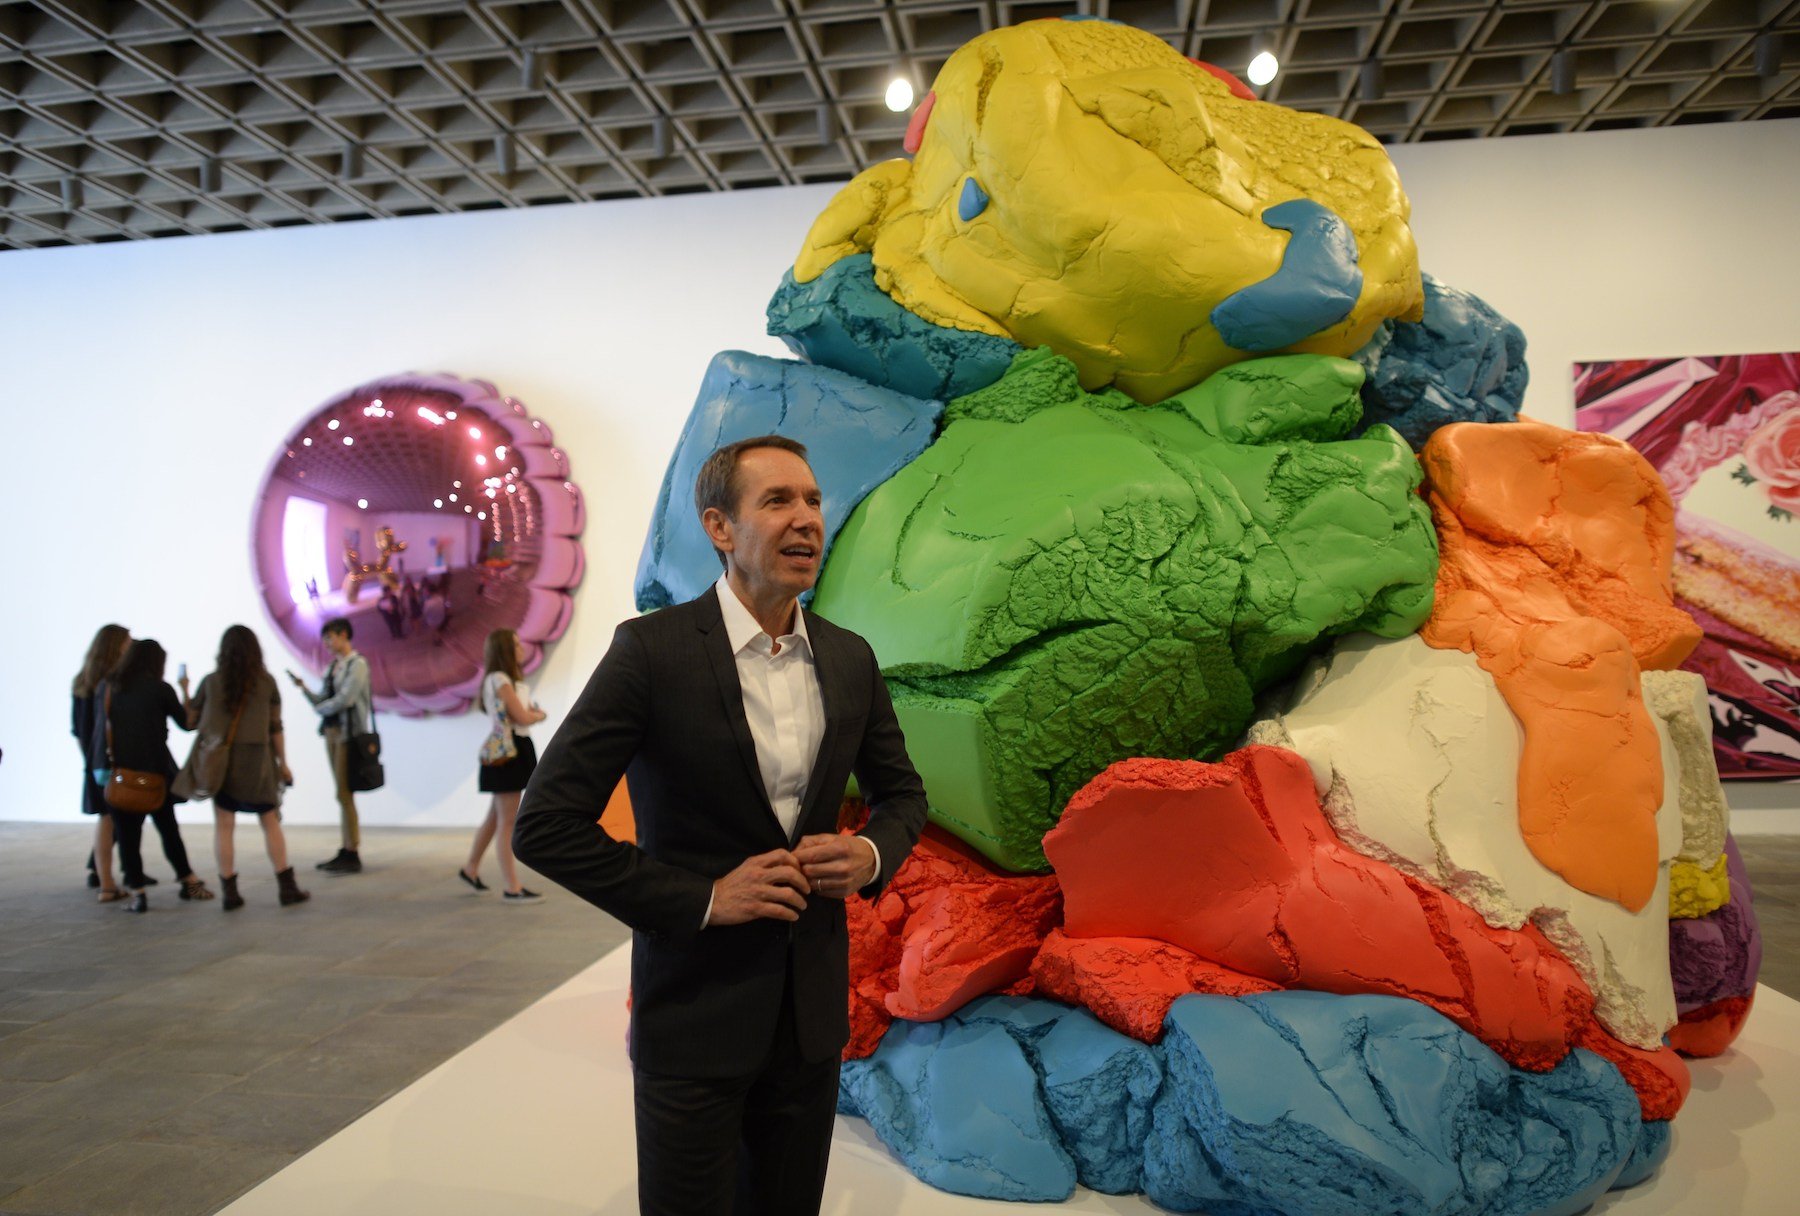 A Sculptor's Lawsuit Against Jeff Koons Over the Originality of